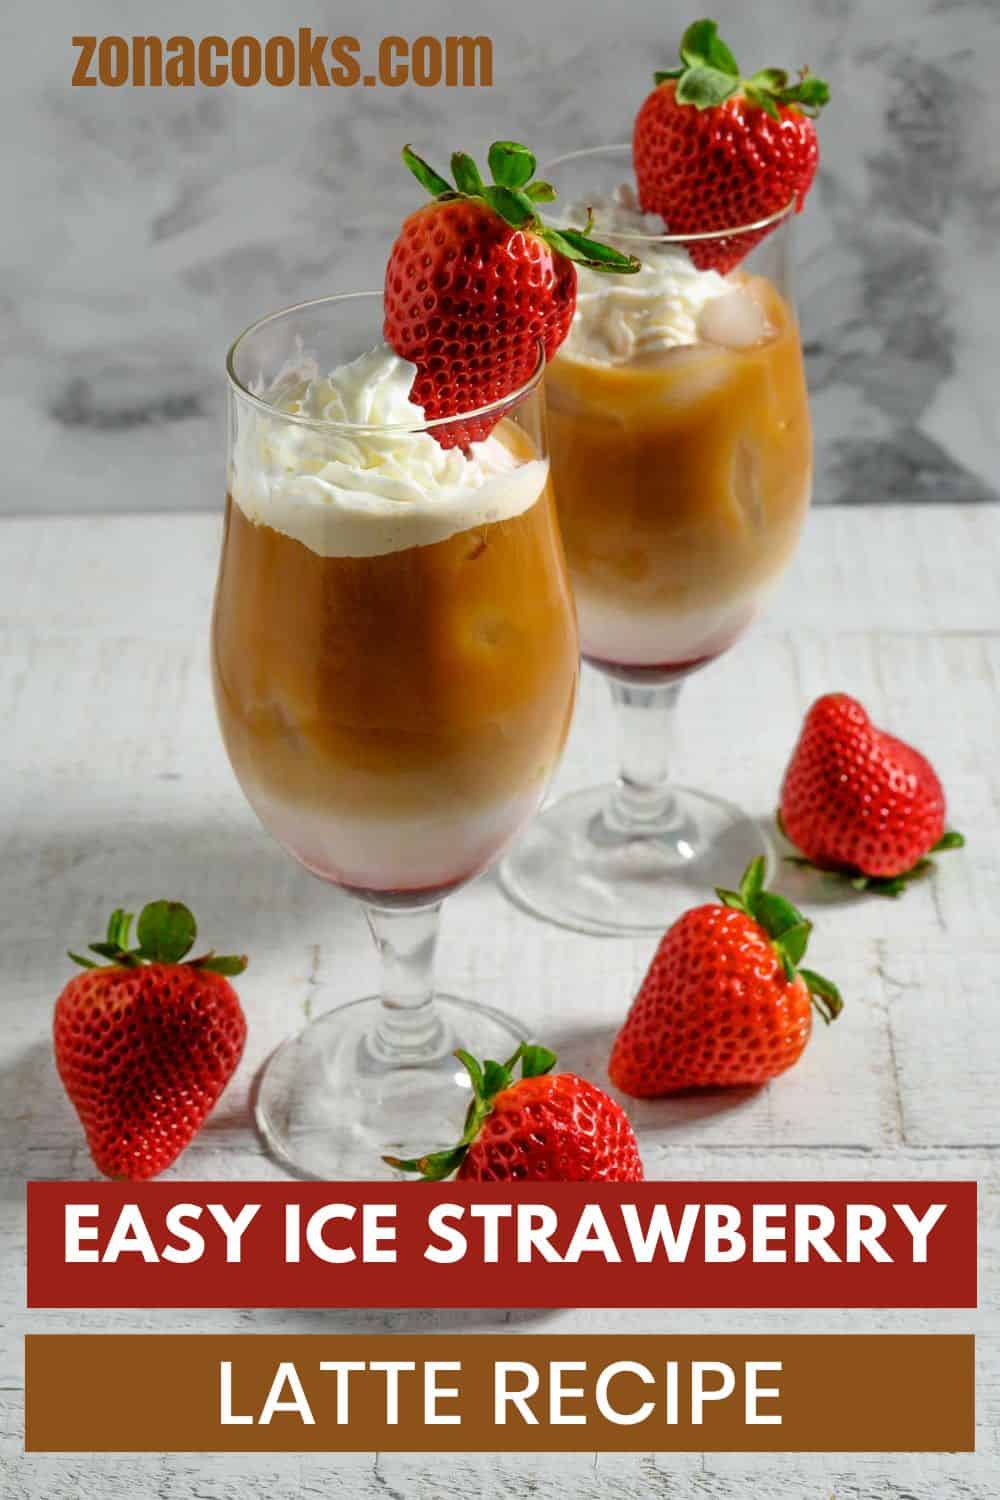 Easy Iced Strawberry Latte Recipe topped with whipped cream and a fresh strawberry.